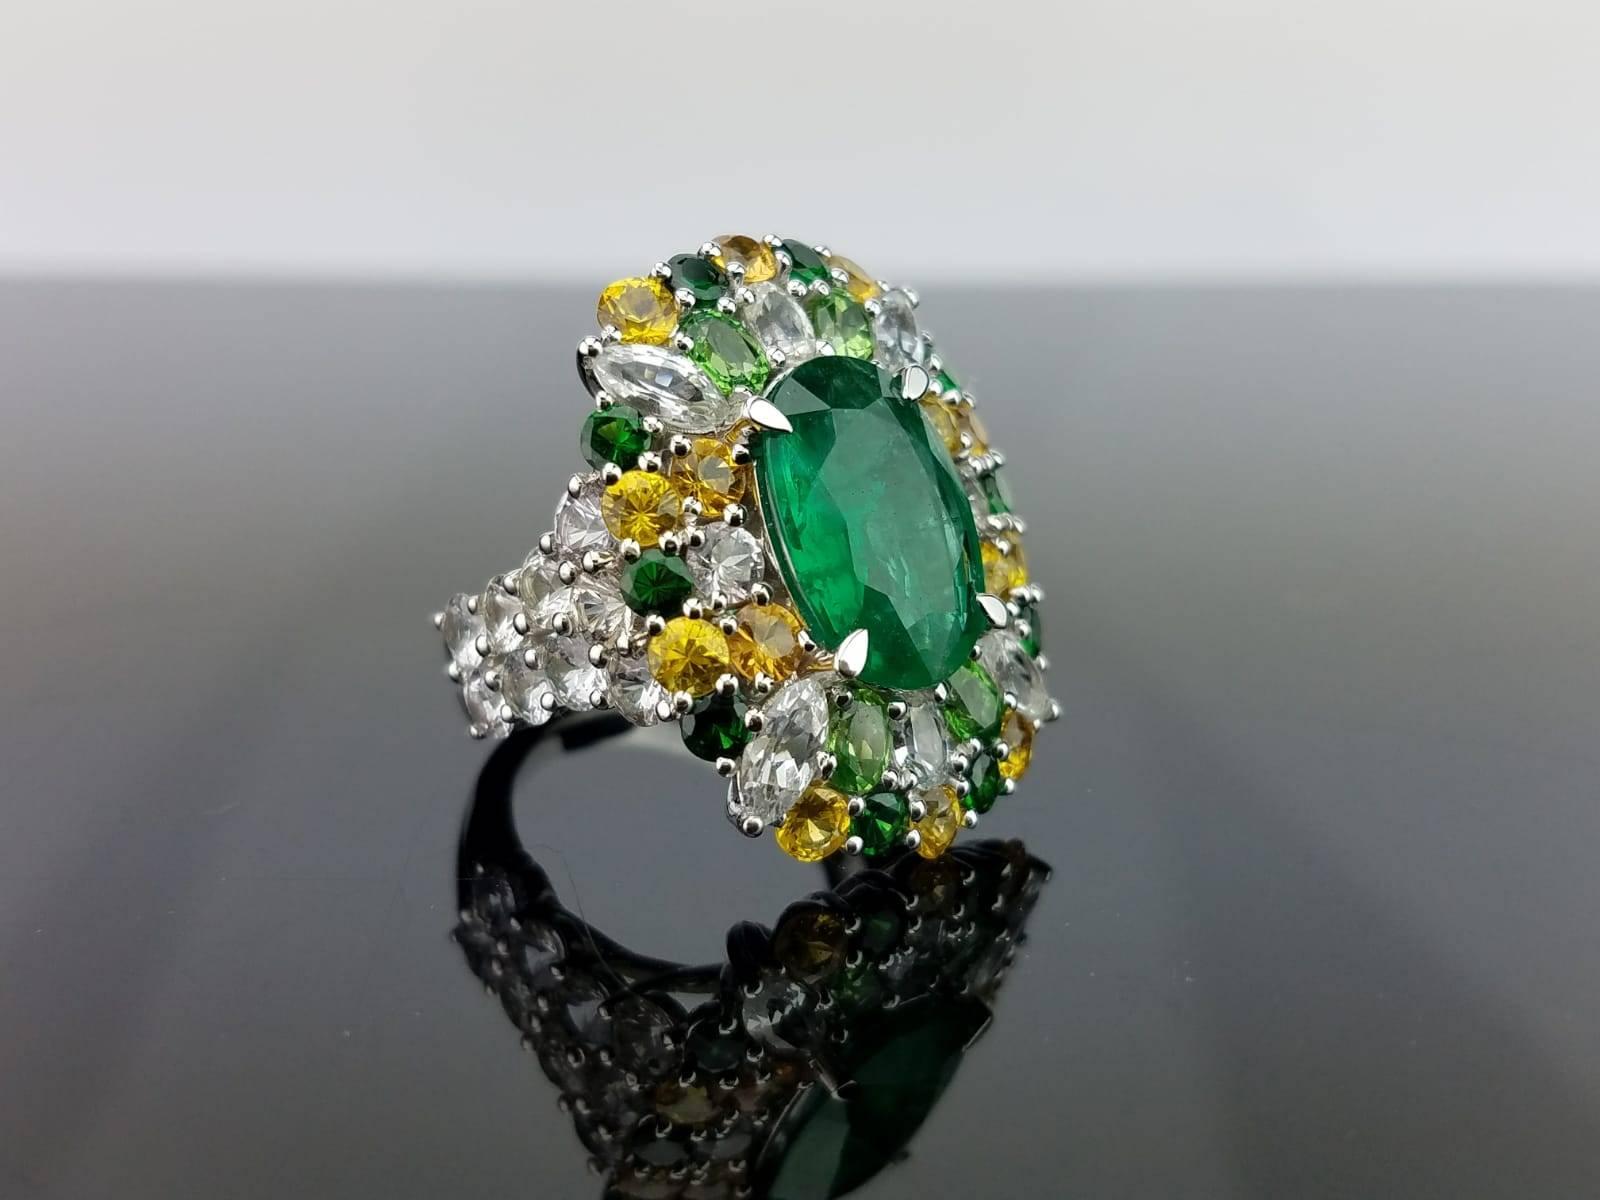 An eye-catching cocktail ring with a 3.81 carat oval shape Zambian Emerald (looks like 5 carat) sorrounded with 6.83 carats of colored Sapphire and 1.86 carats of Green Garnet. All set in 18K Gold weighing 12.50 grams. 

Currently a ring size US 6,